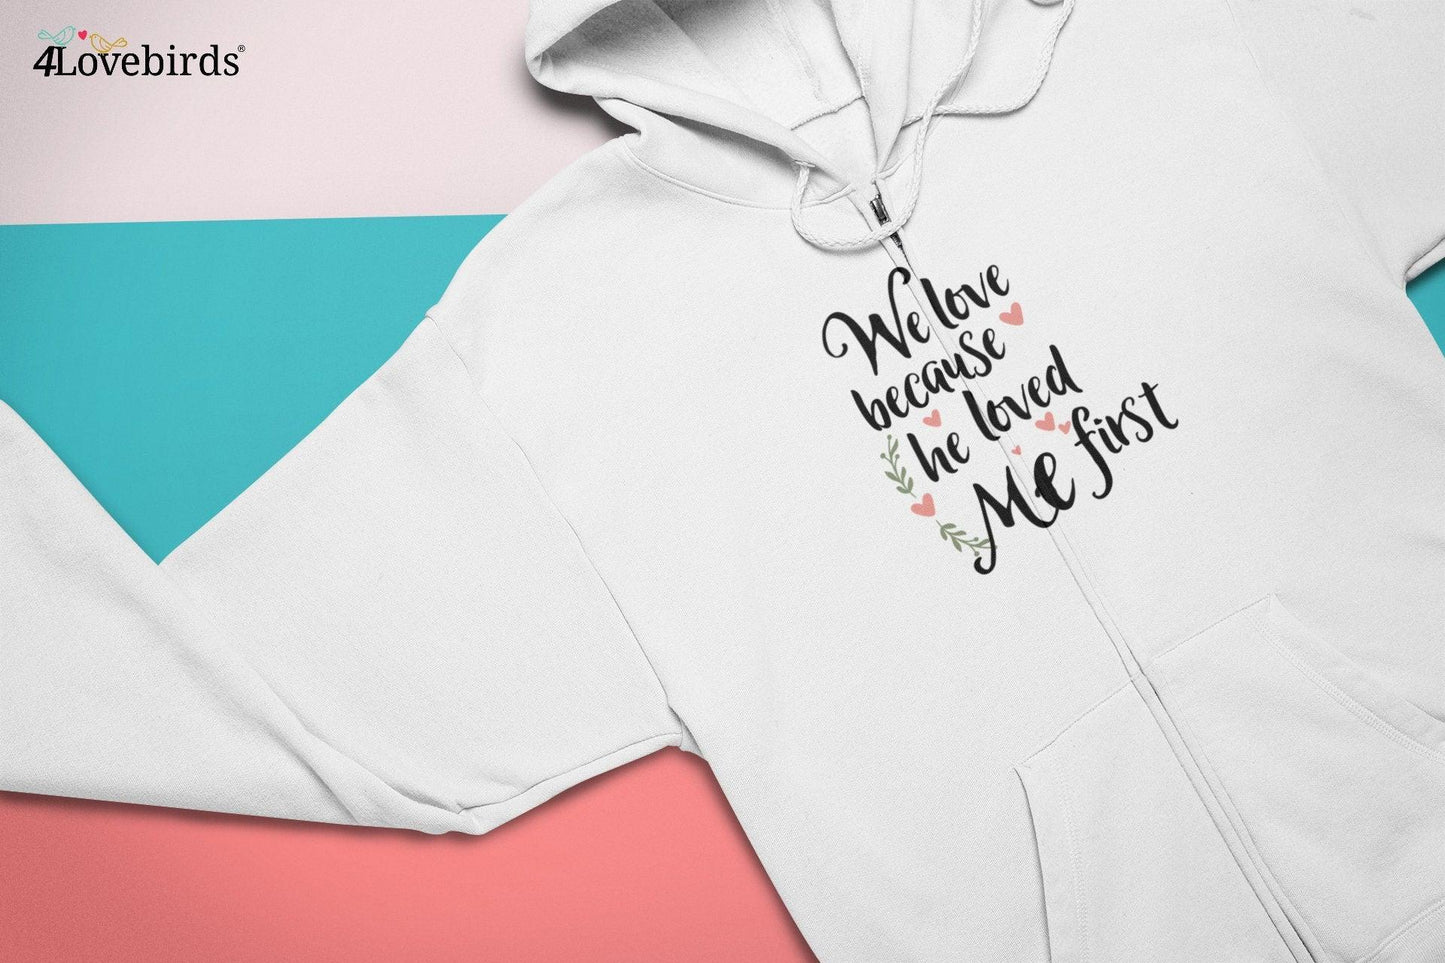 We love because he/she loved me first Hoodie, Lovers matching T-shirt, Gift for Couples, Valentine Sweatshirt, Cute Tshirt, Gift for Maried - 4Lovebirds